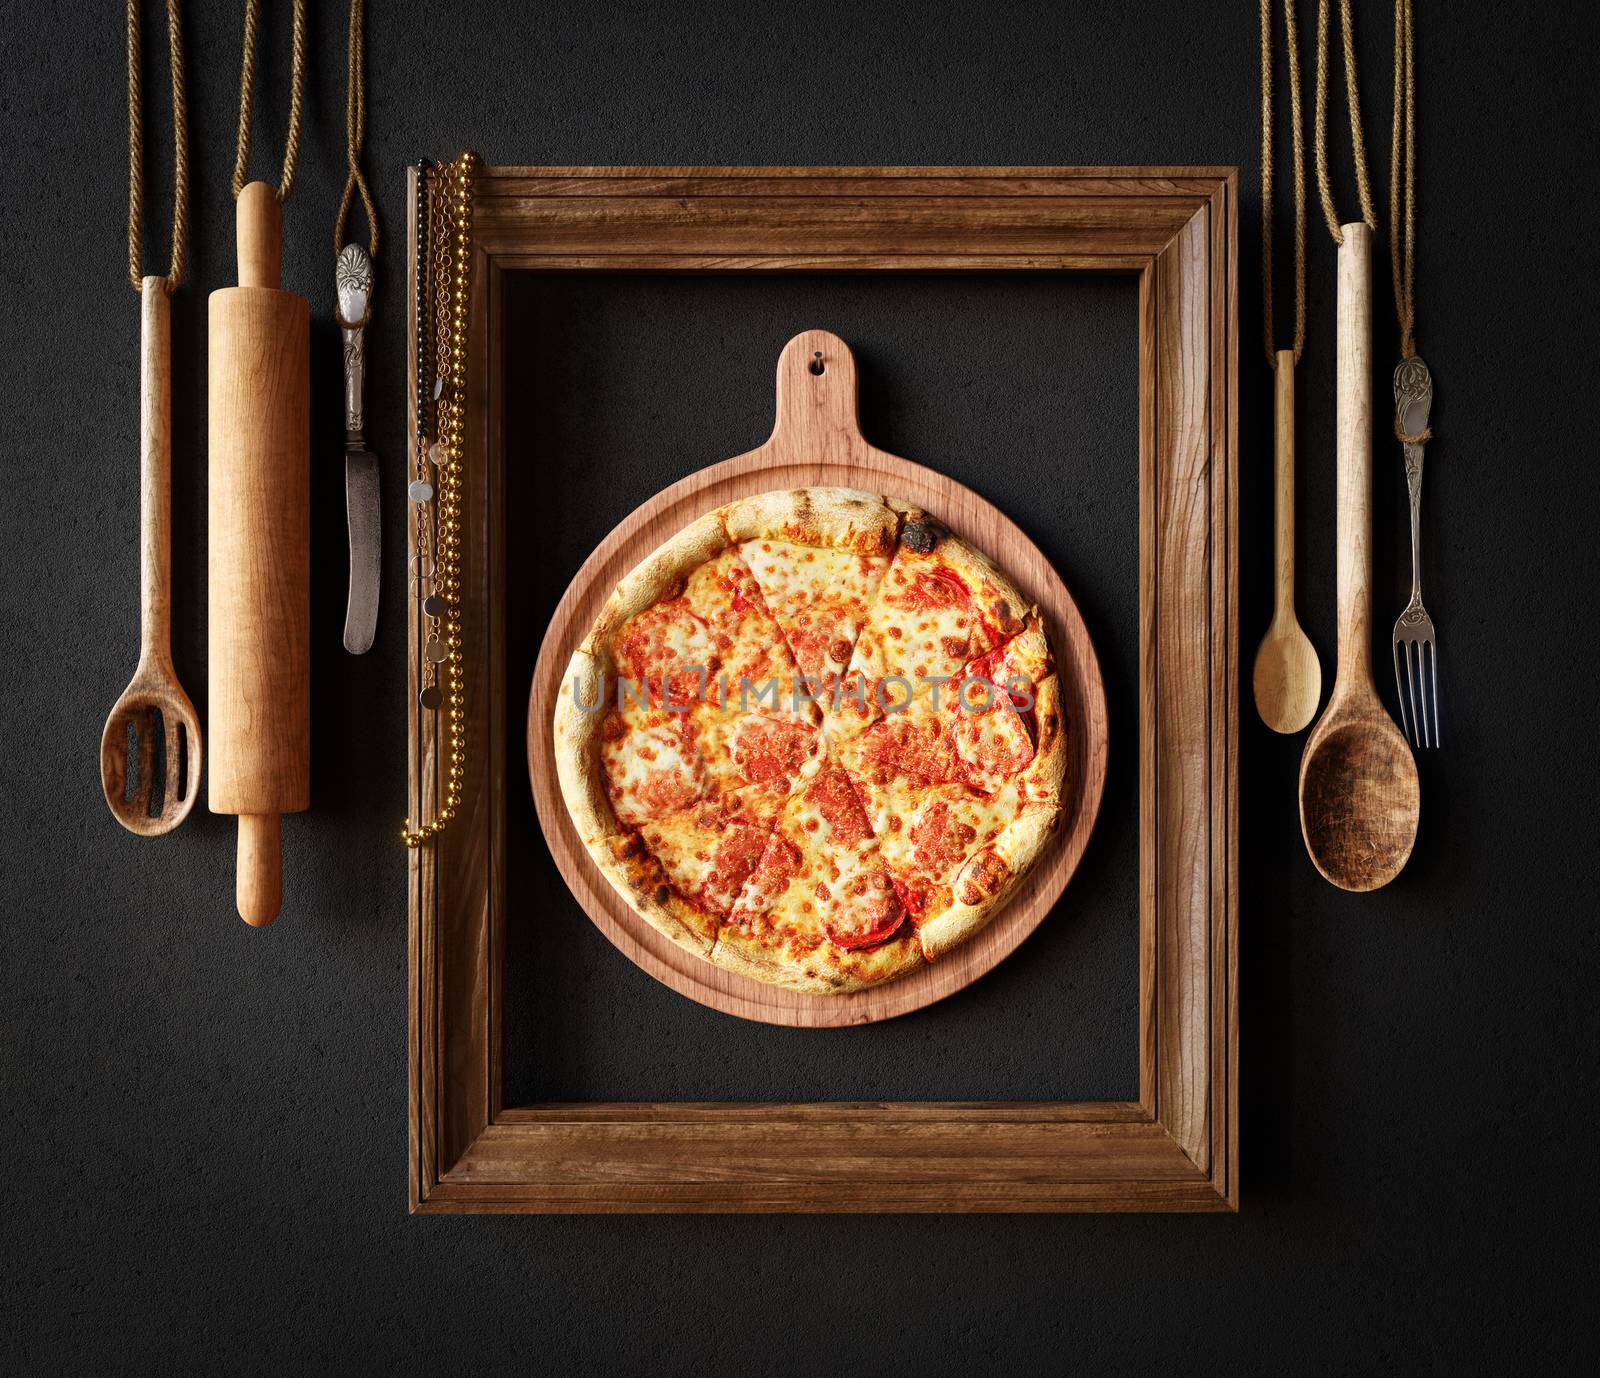 Hot pizza slice with melting cheese with frame concept close up photo by denisgo